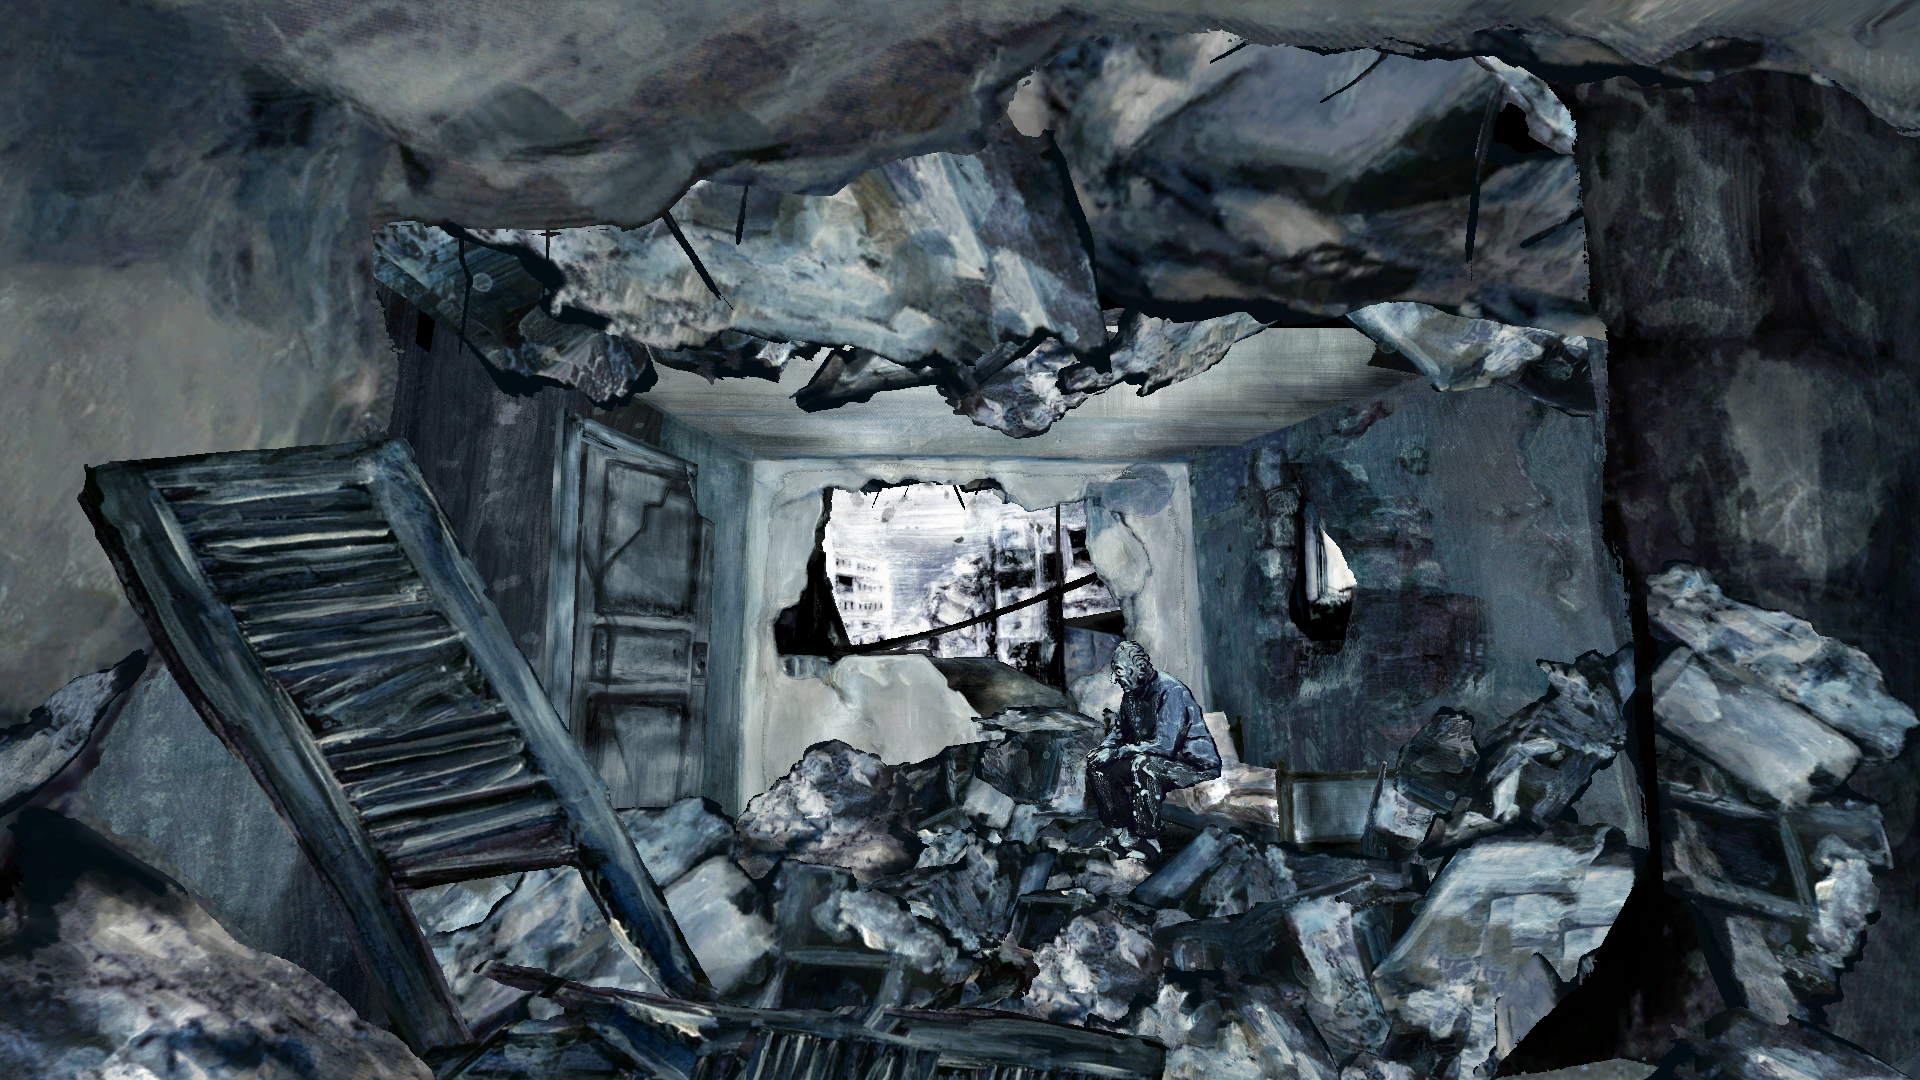 Screenshot from The Hangman at Home, depicting a man in a partially destroyed building